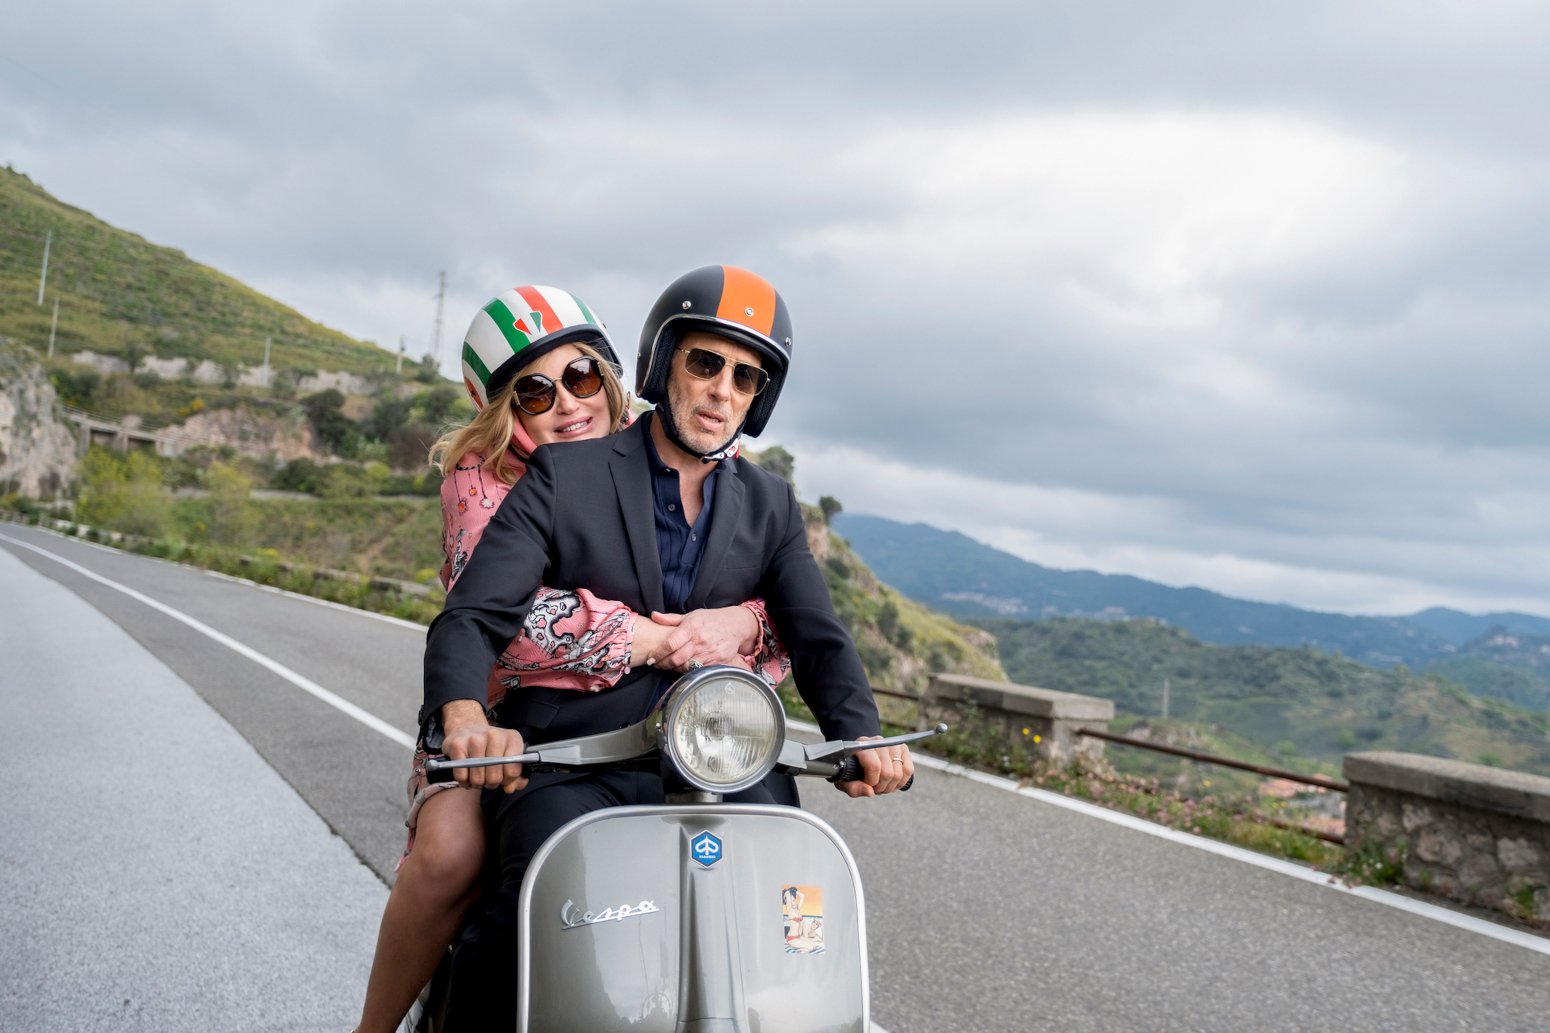 Jennifer Coolidge and Jon Gries as Tanya and Greg in 'The White Lotus' Season 2 for our article about characters who should return in season 3. They're riding a scooter with mountains in the background.